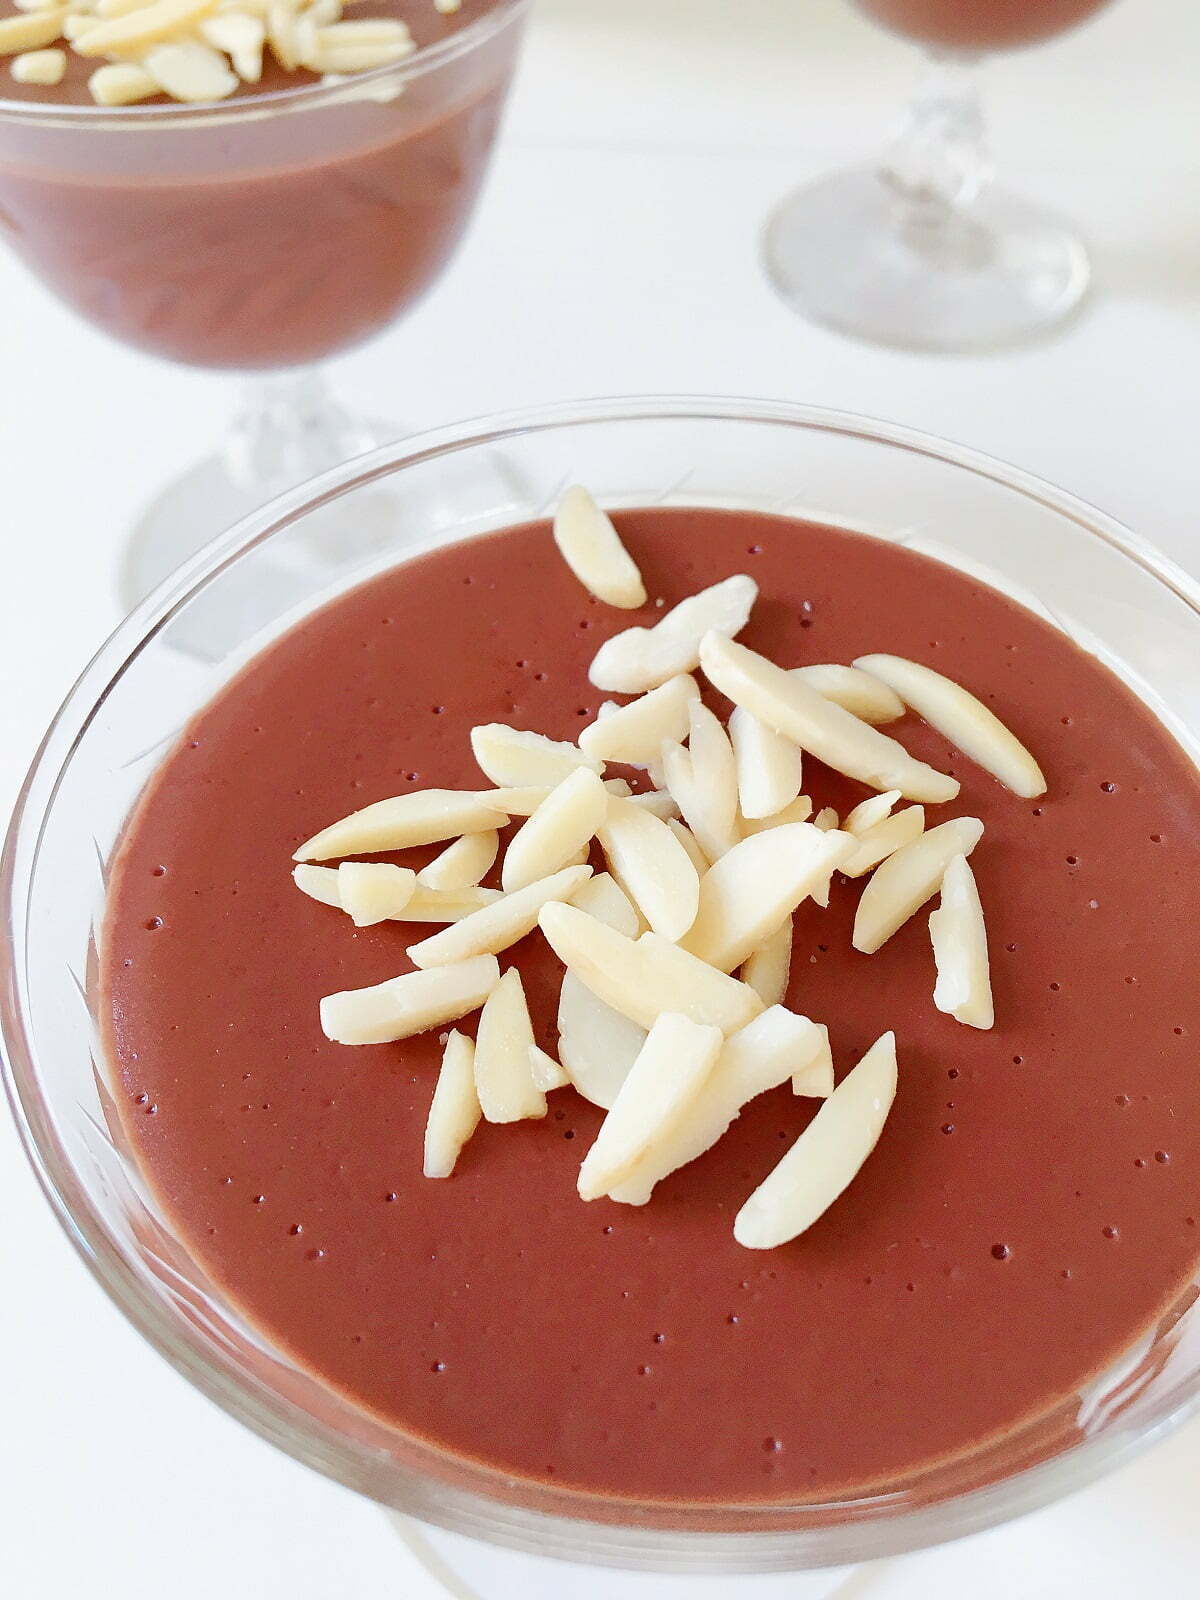 Silky Chocolate Pudding with Rum Explosion - COOK COOK GO